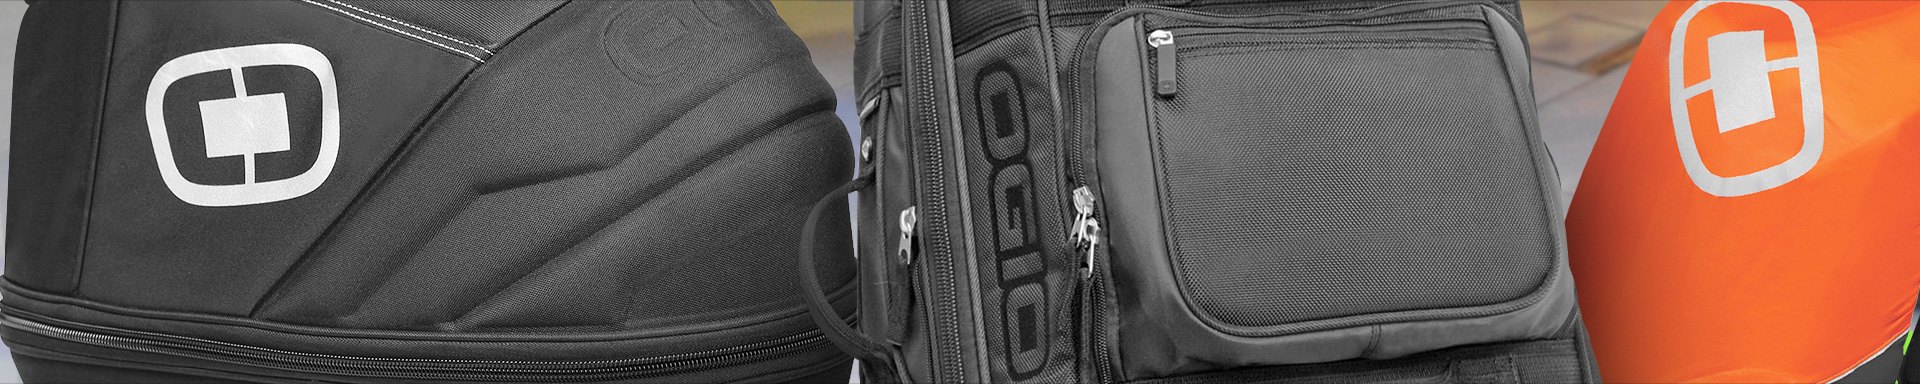 Ogio Electronics Bags & Cases